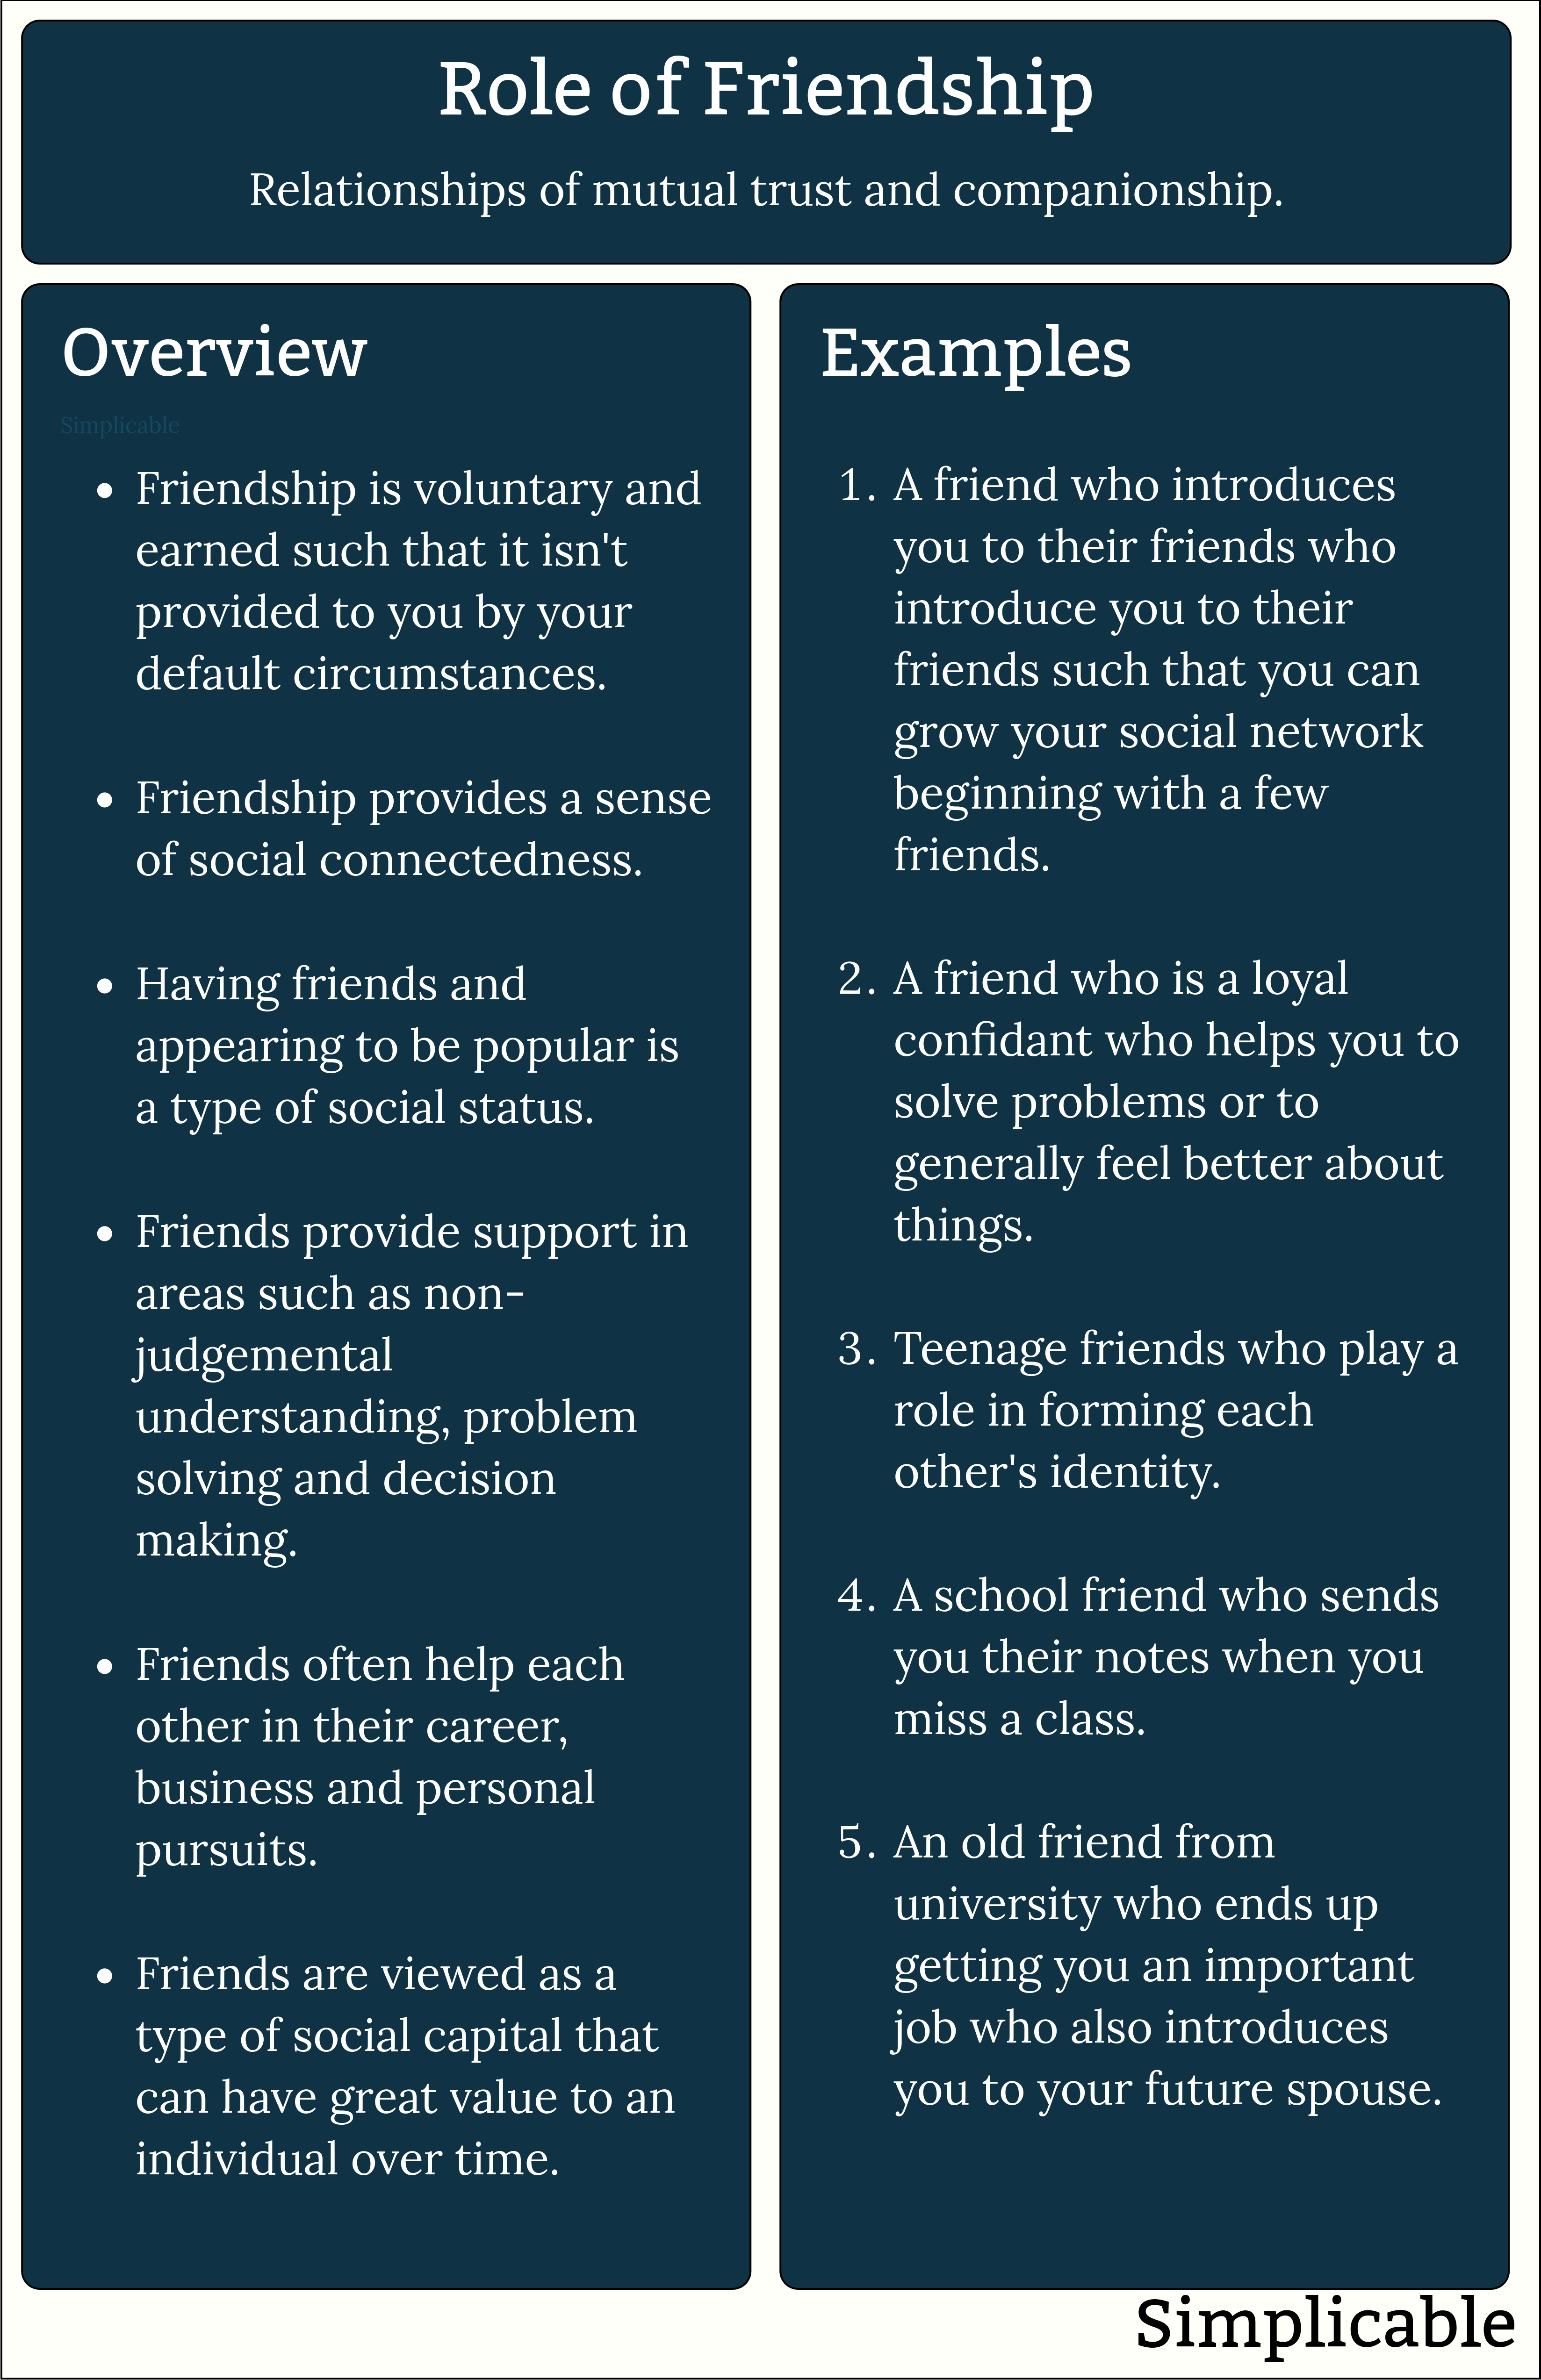 role of friendship overview and examples